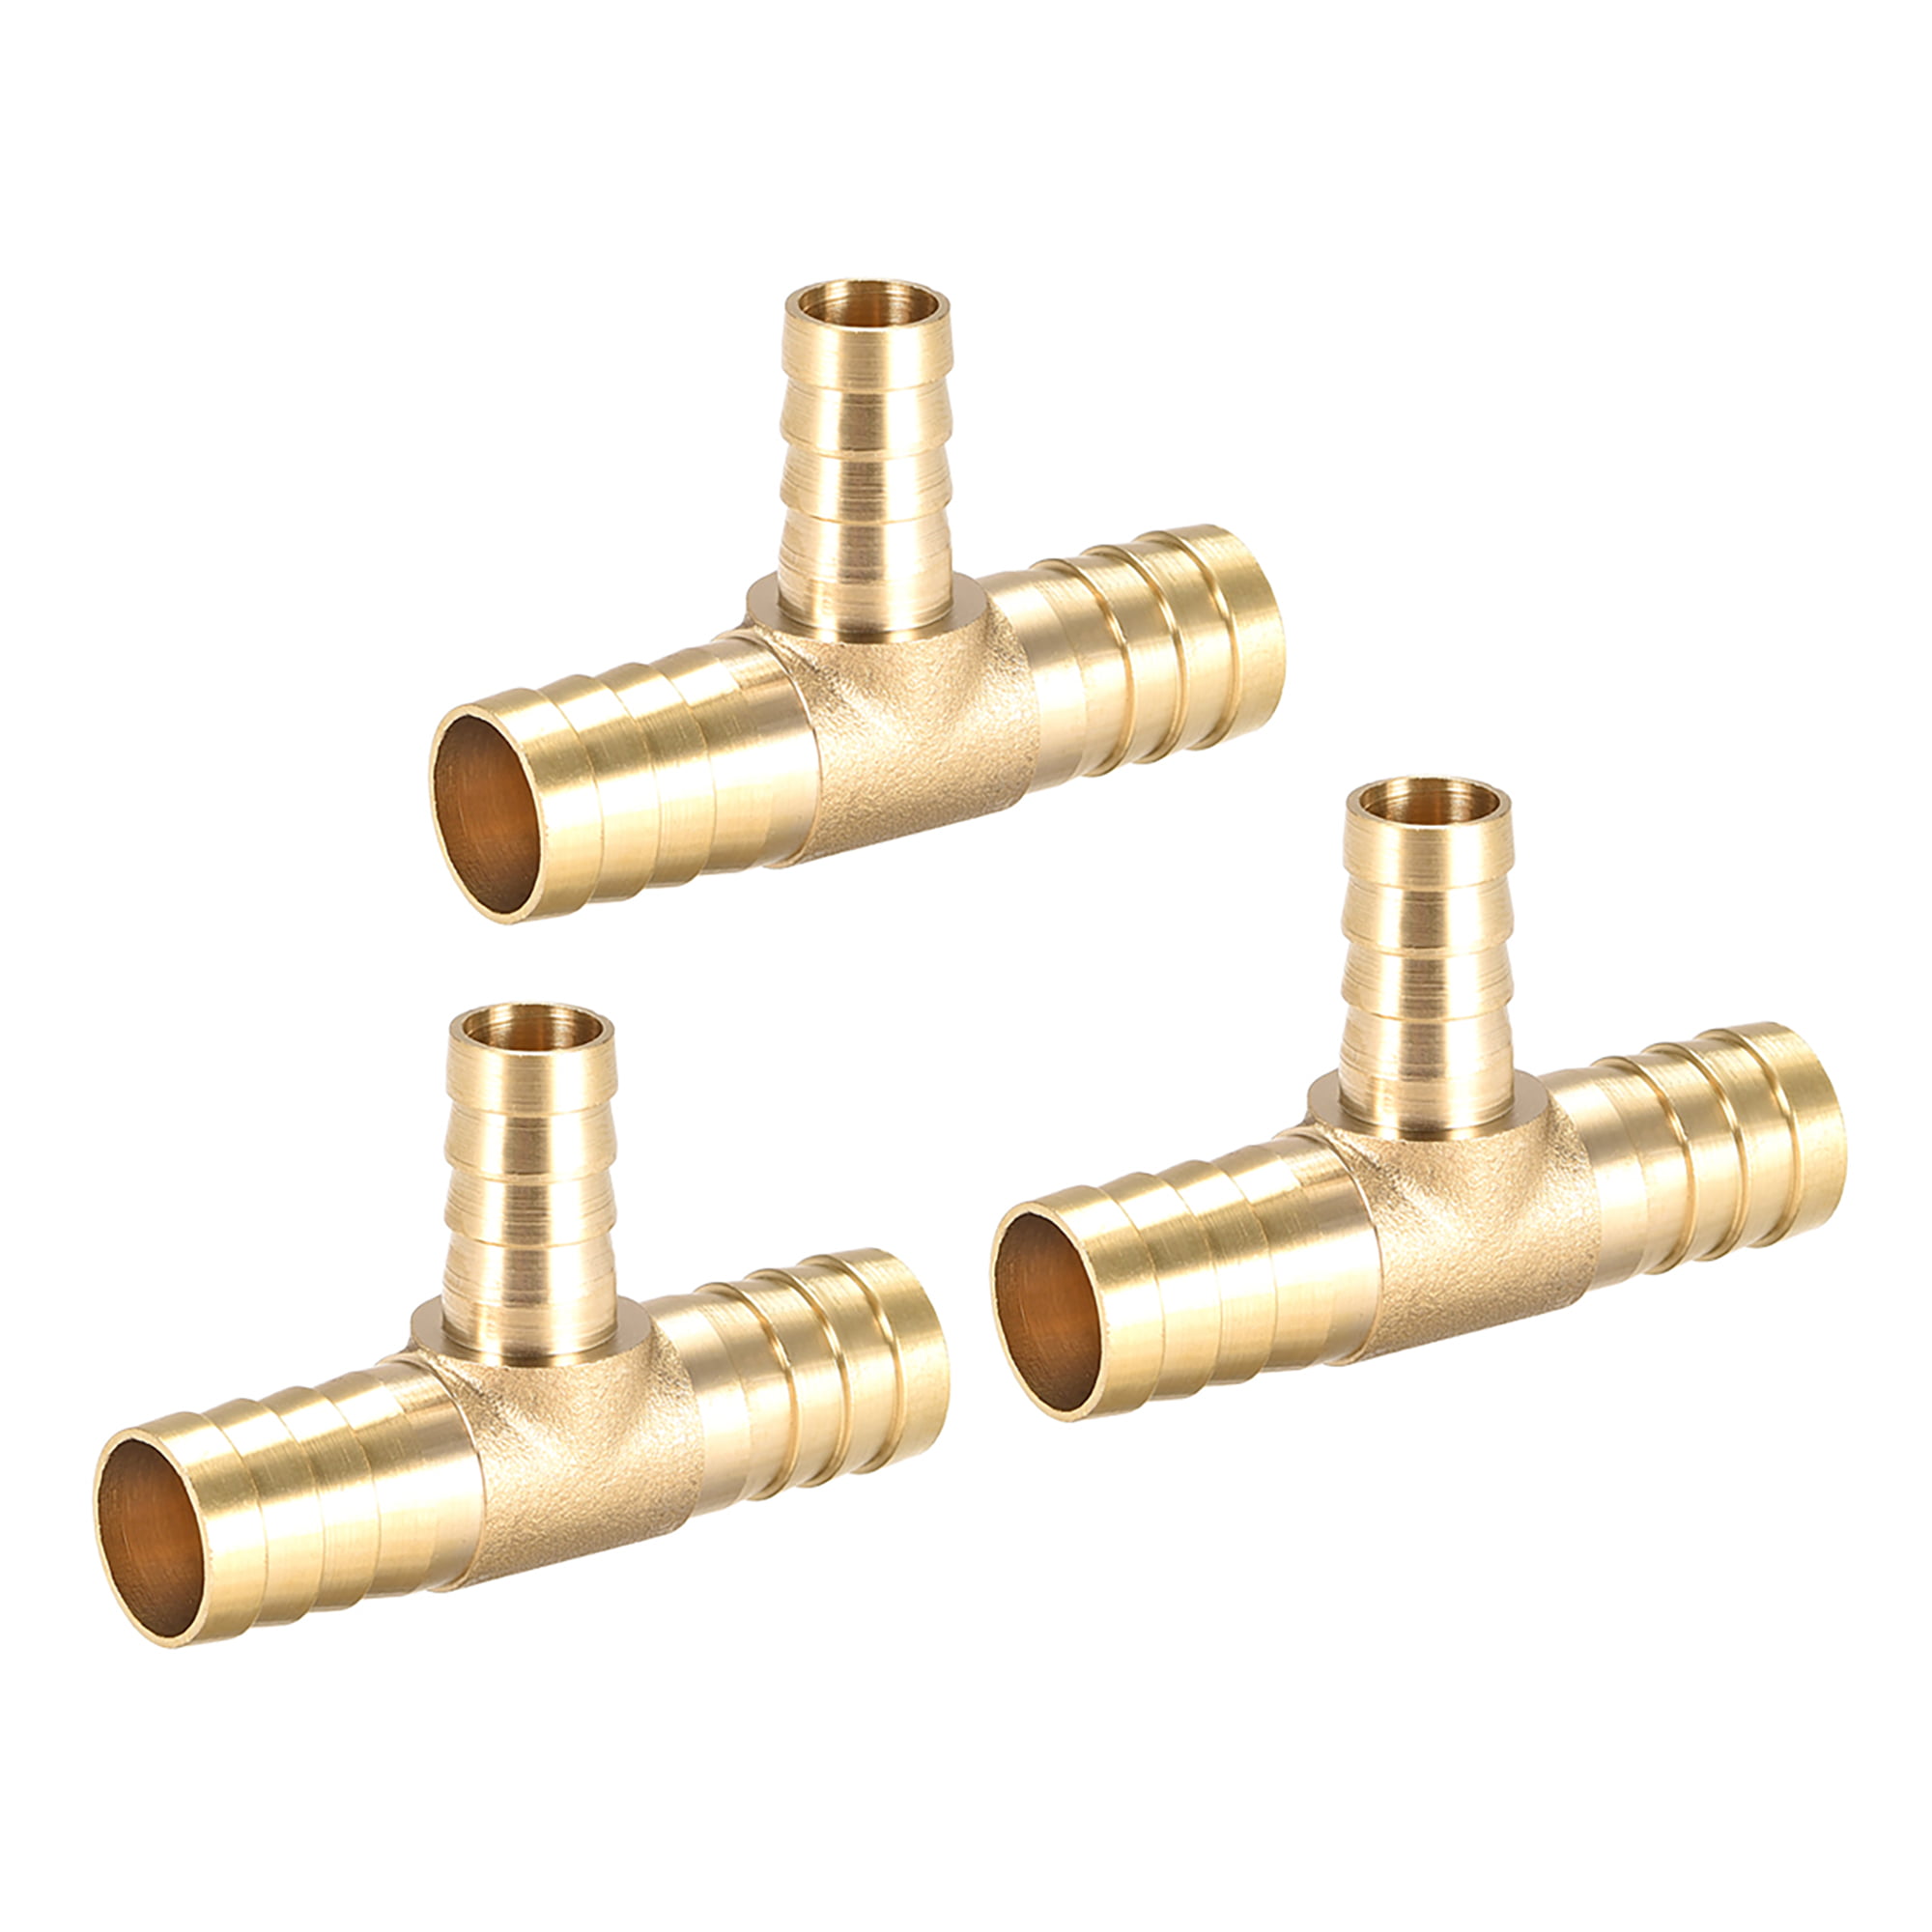 12mm Brass 4 Way X Piece Barbed Joiner Fuel Hose Connector Water Air Fuel Gas 